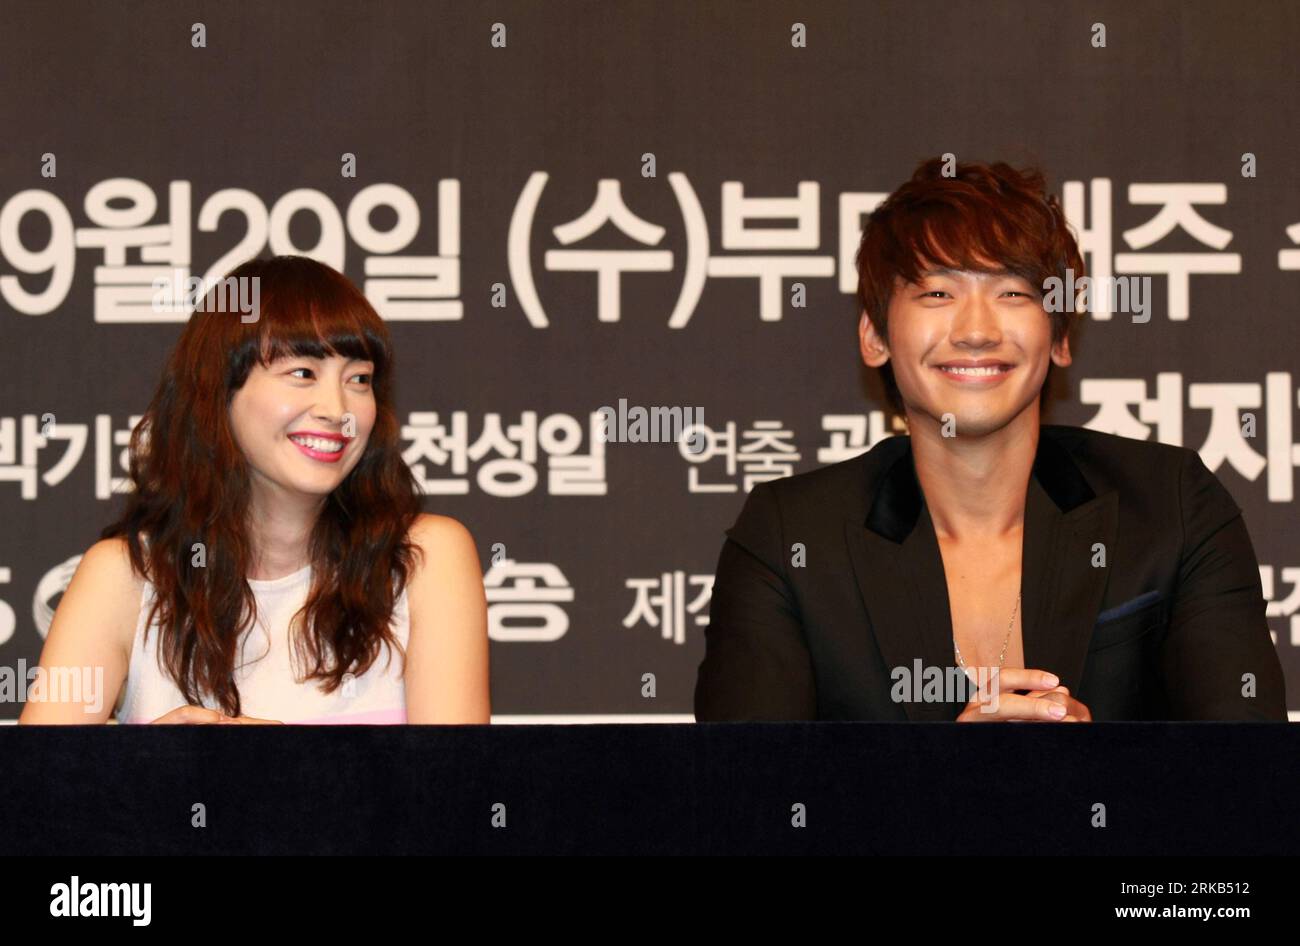 Bildnummer: 54474893  Datum: 27.09.2010  Copyright: imago/Xinhua (100927) -- Seoul, Sept. 27, 2010 (Xinhua) -- South Korean actor Jung Ji-hoon (Rain) and actress Lee Na-young speak to media during a production report conference of the TV drama Fugitive Plan B in Seoul, South Korea, Sept. 27, 2010. (Xinhua/Park Jin-hee)(zf) SOUTH KOREA-ENTERTAINMENT-TV DRAMA-RAIN PUBLICATIONxNOTxINxCHN Entertainment People TV Film vdig xub 2010 quer     Bildnummer 54474893 Date 27 09 2010 Copyright Imago XINHUA  Seoul Sept 27 2010 XINHUA South Korean Actor Young ji Hoon Rain and actress Lee Na Young speak to Me Stock Photo